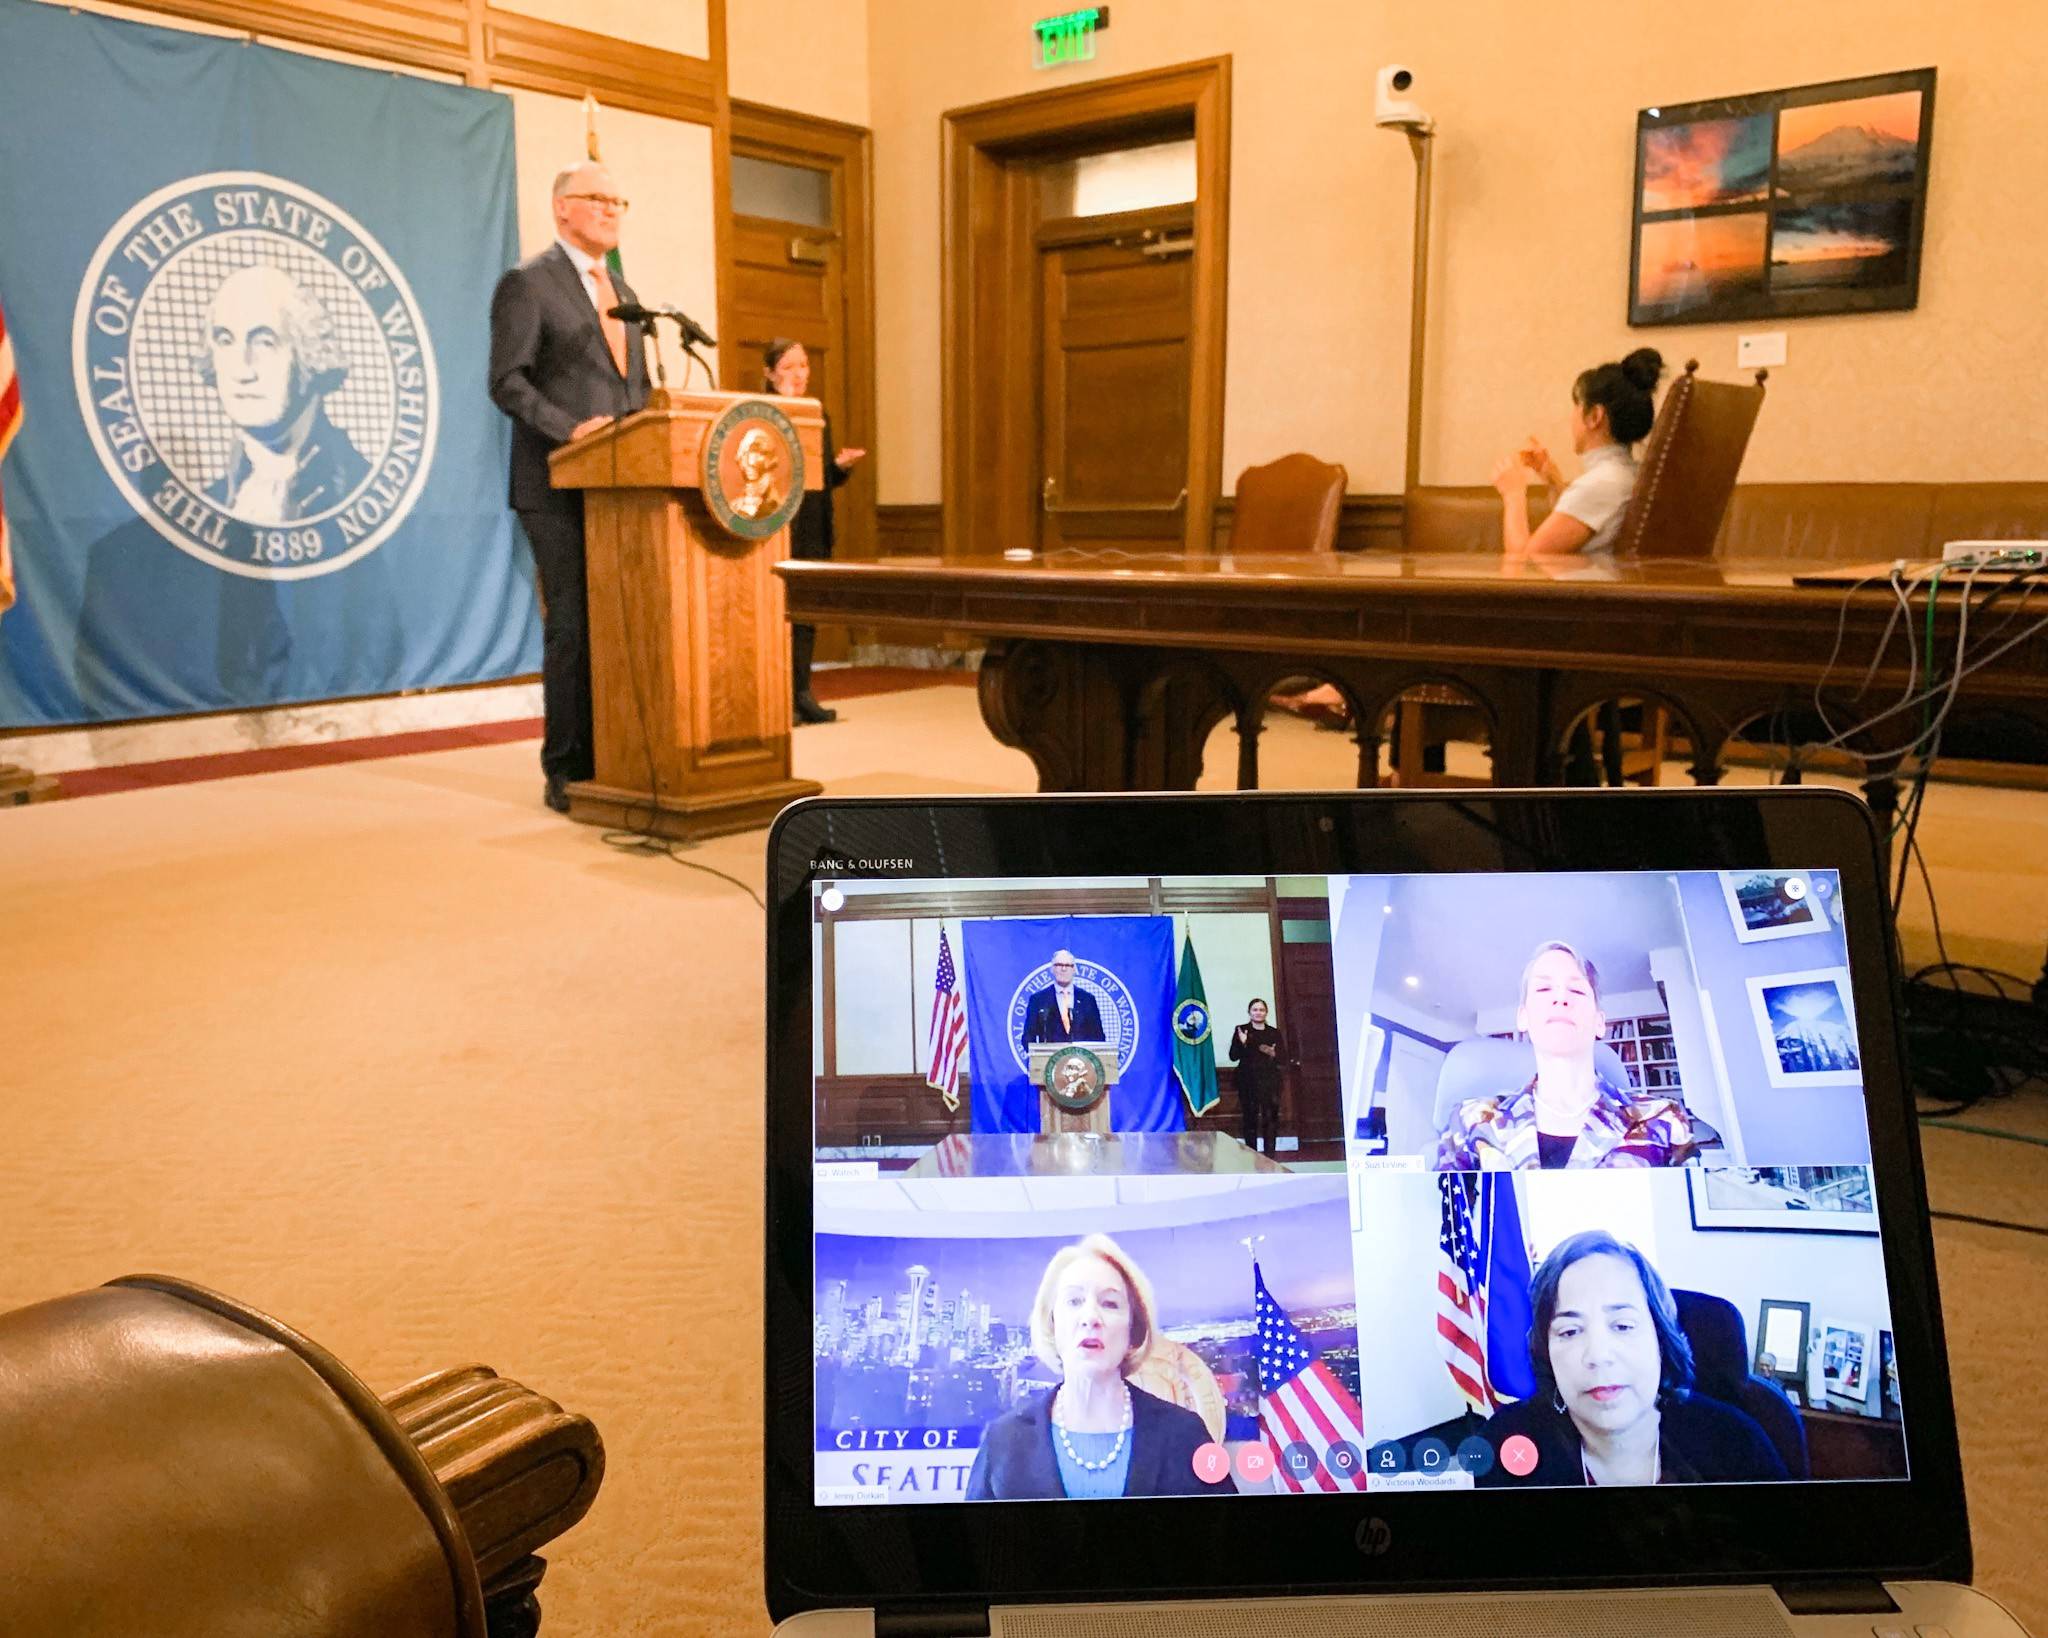 Washington Gov. Jay Inslee unveils an economic relief package to help workers, businesses, tenants, families and more in response to the COVID-19 outbreak. Other state and municipal leaders, as well as journalists, also participated remotely to accommodate social distancing. (Office of the Governor Photo)